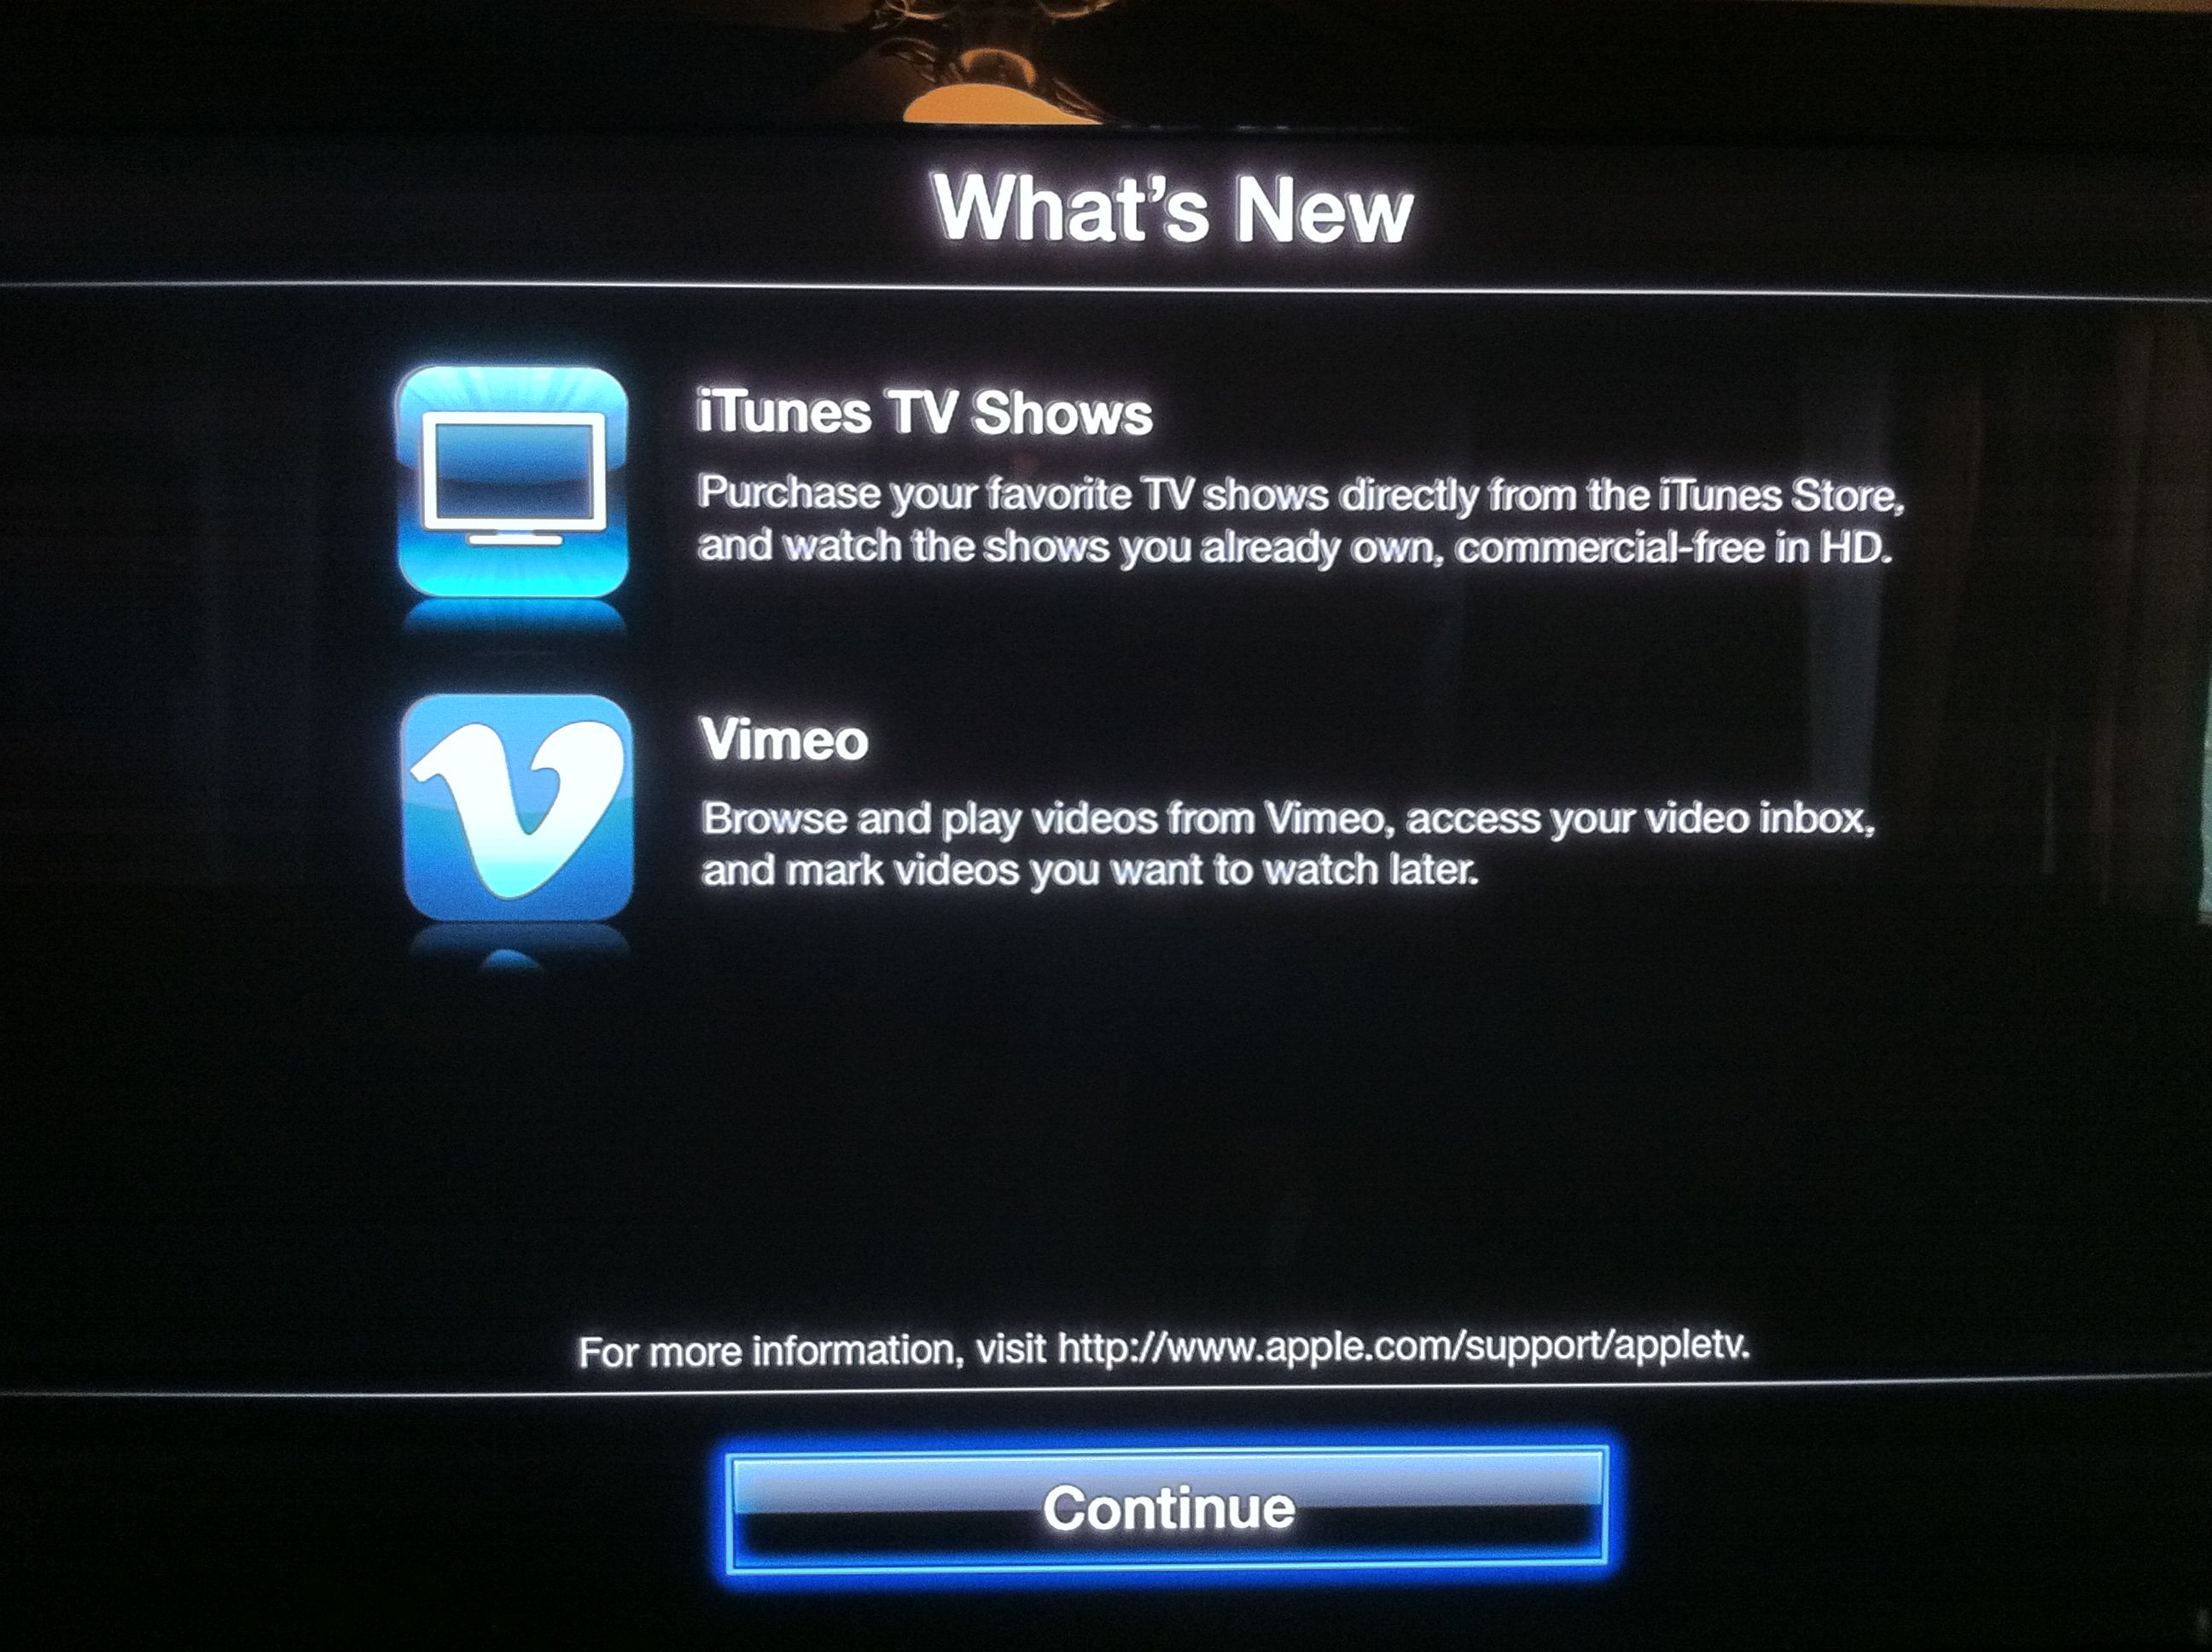 Apple TV iOS 4.3 streams TV shows from iCloud and Vimeo support - TNW Apple